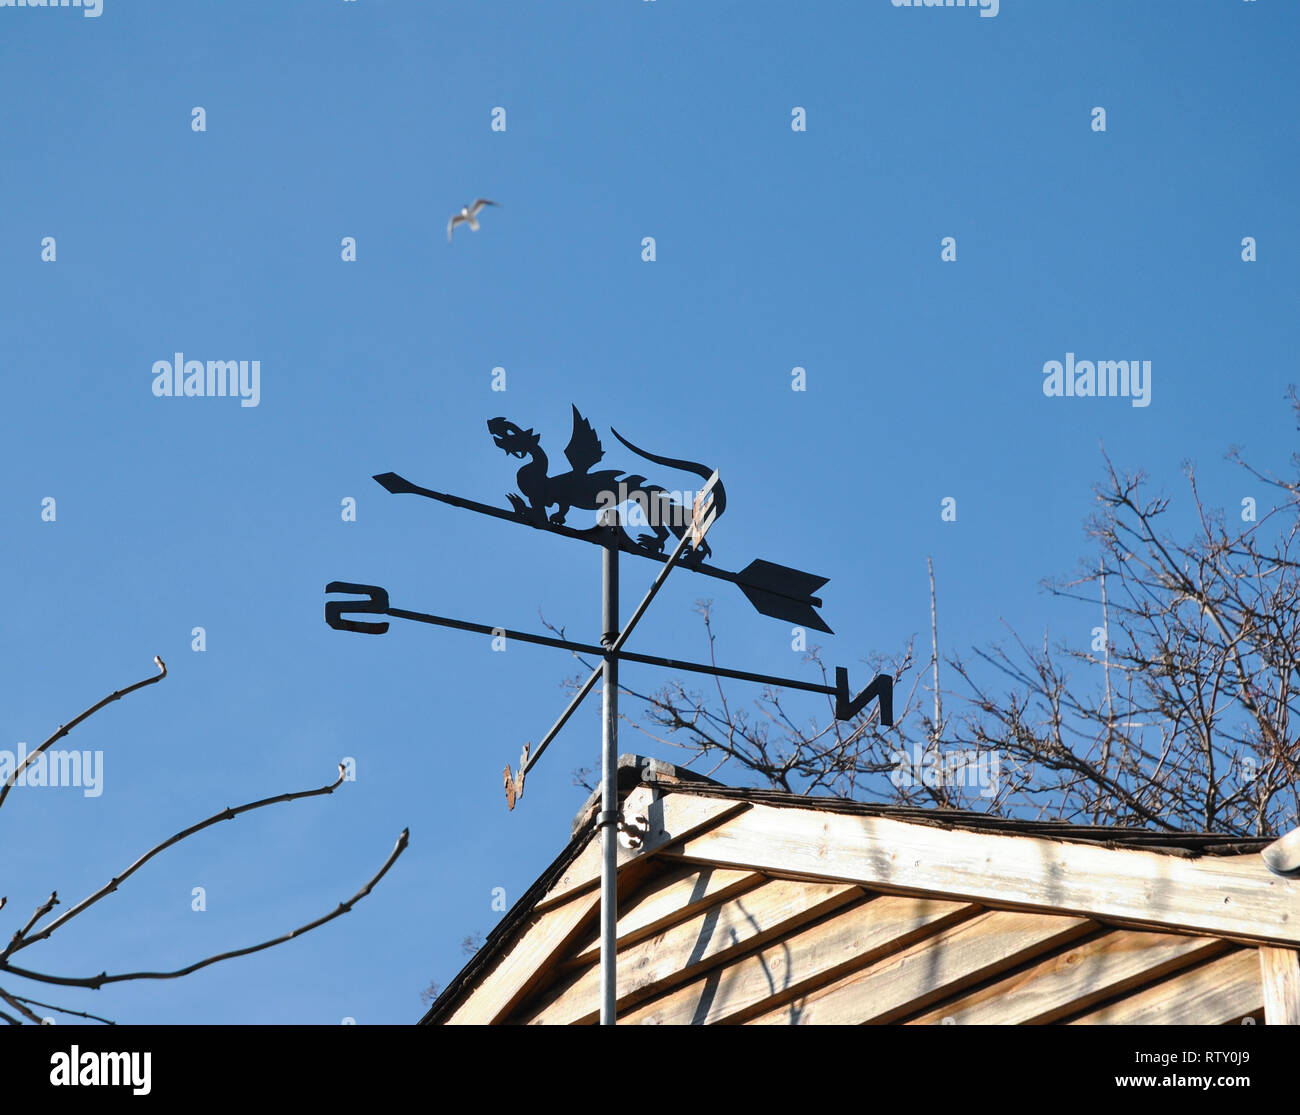 A weather-vane set against a clear blue sky with a bird flying in the background Stock Photo